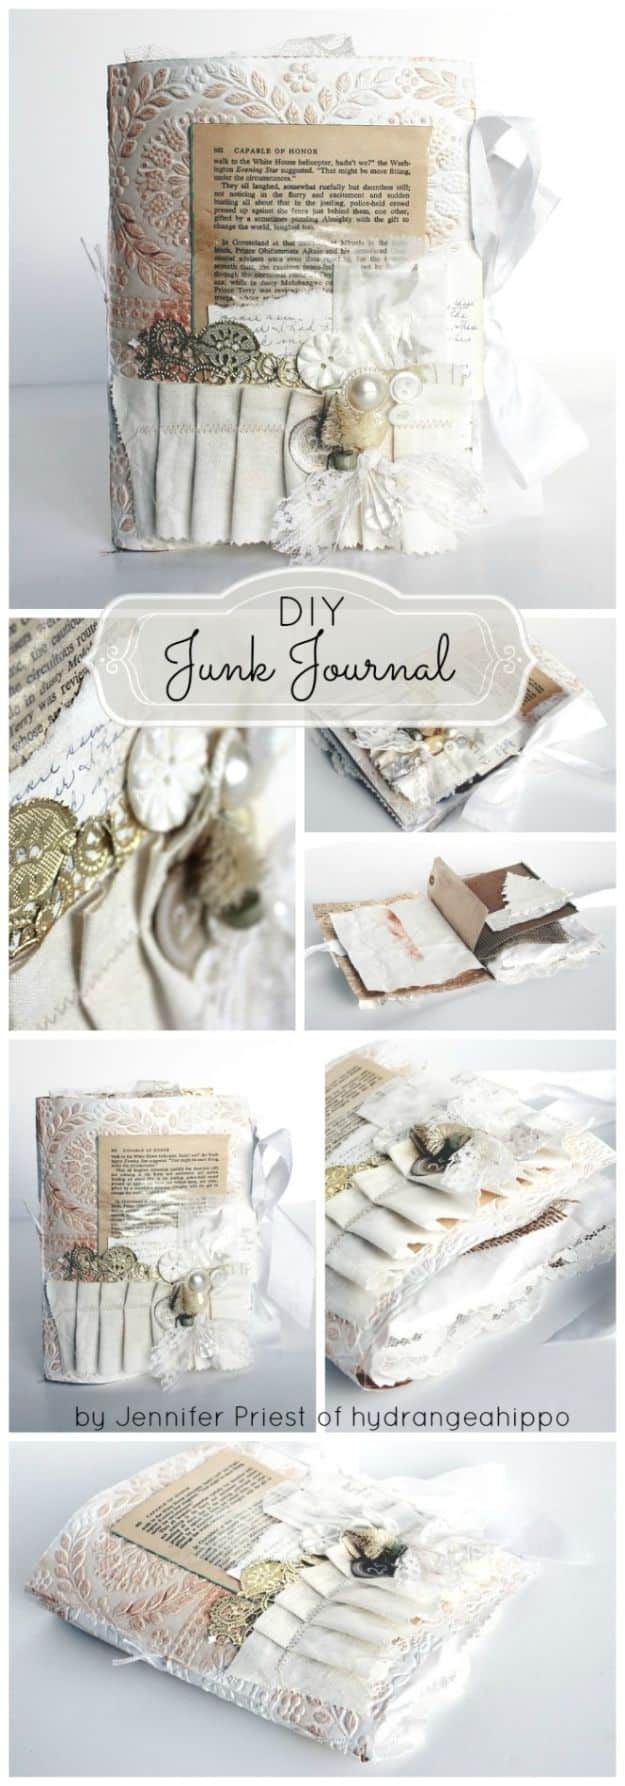 DIY Journals - DIY Junk Journal - Ideas For Making A Handmade Journal - Cover Art Tutorial, Binding Tips, Easy Craft Ideas for Kids and For Teens - Step By Step Instructions for Making From Scratch, From An Old Book - Leather, Faux Marble, Paper, Monogram, Cute Do It Yourself Gift Idea 